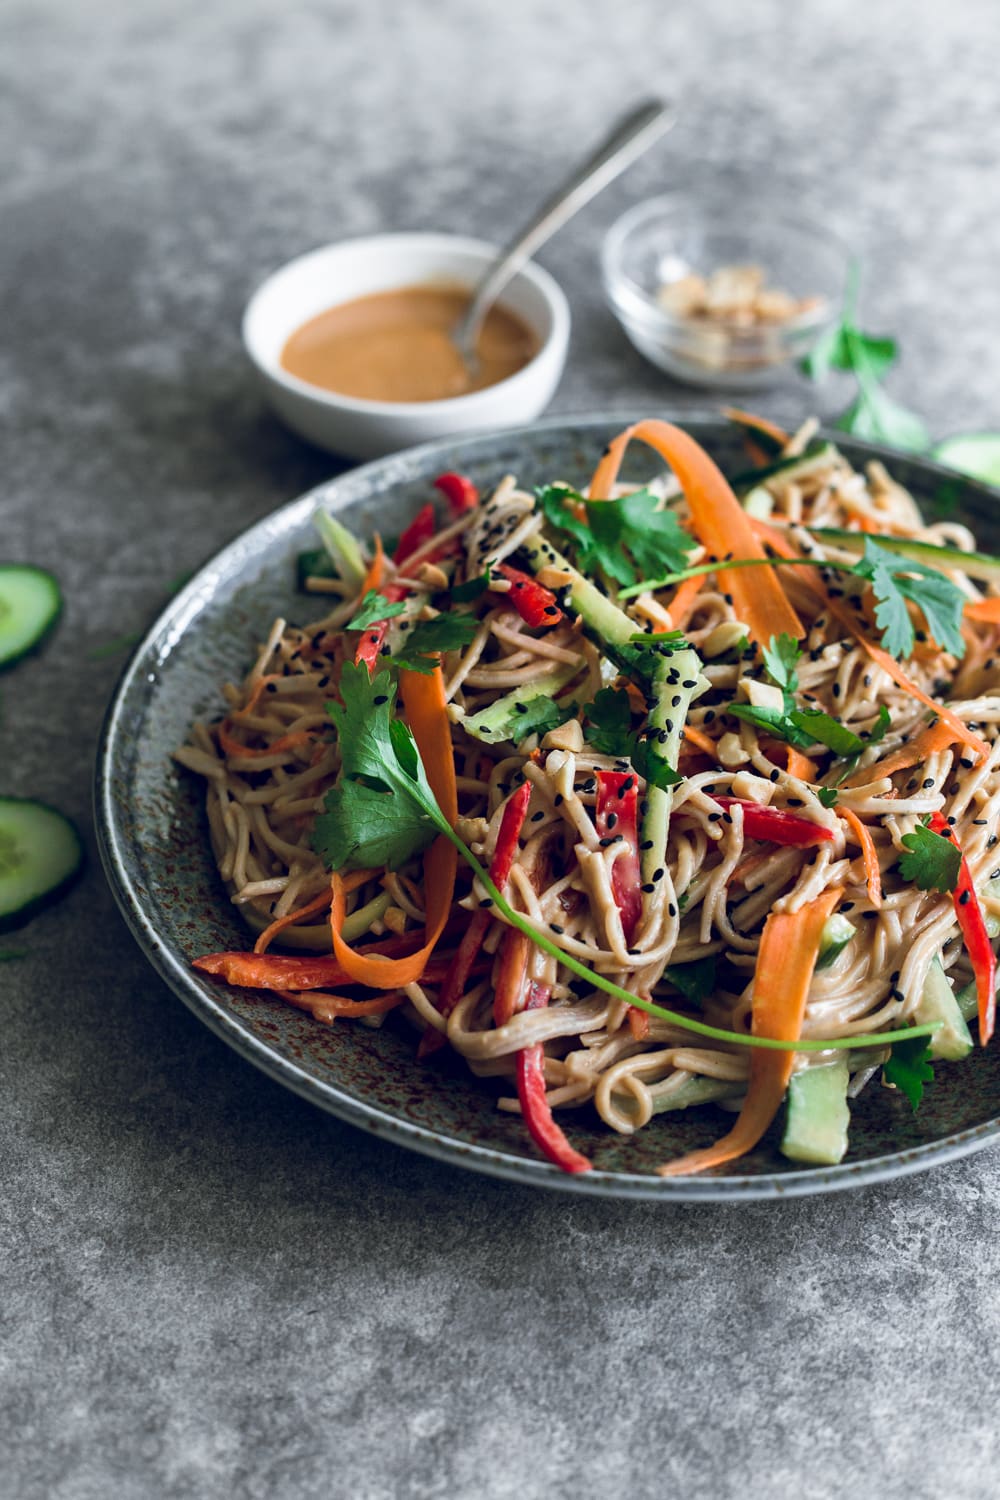 A delicious and healthy Vegan Peanut Soba Noodle Salad Recipe. Soba Noodles and Colorful Veggies dressed in an easy and delicious Peanut Sauce. #vegan #peanut #japanese #soba #noodle #salad #summer #simple #healthy #peanutbutter #lunchbox #packedlunch #cold 